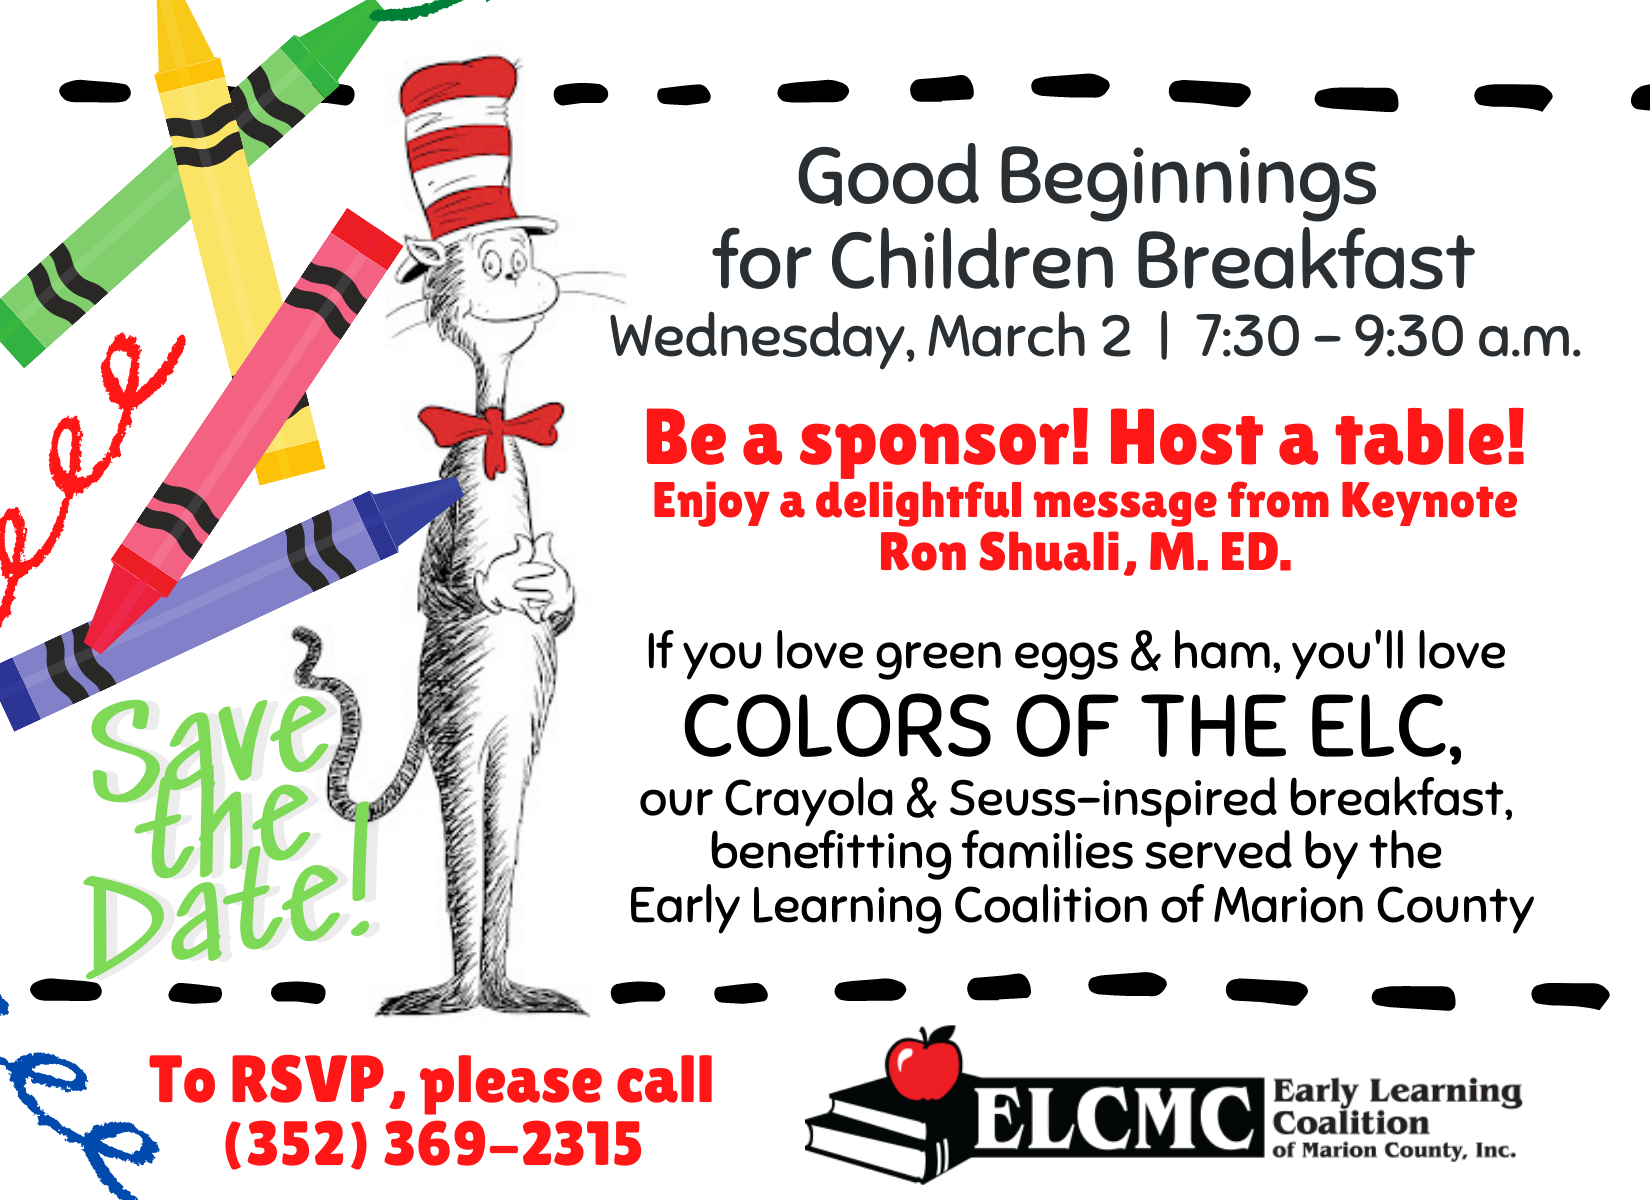 save the date card with breakfast details, crayons and Cat in the Hat Cartoon